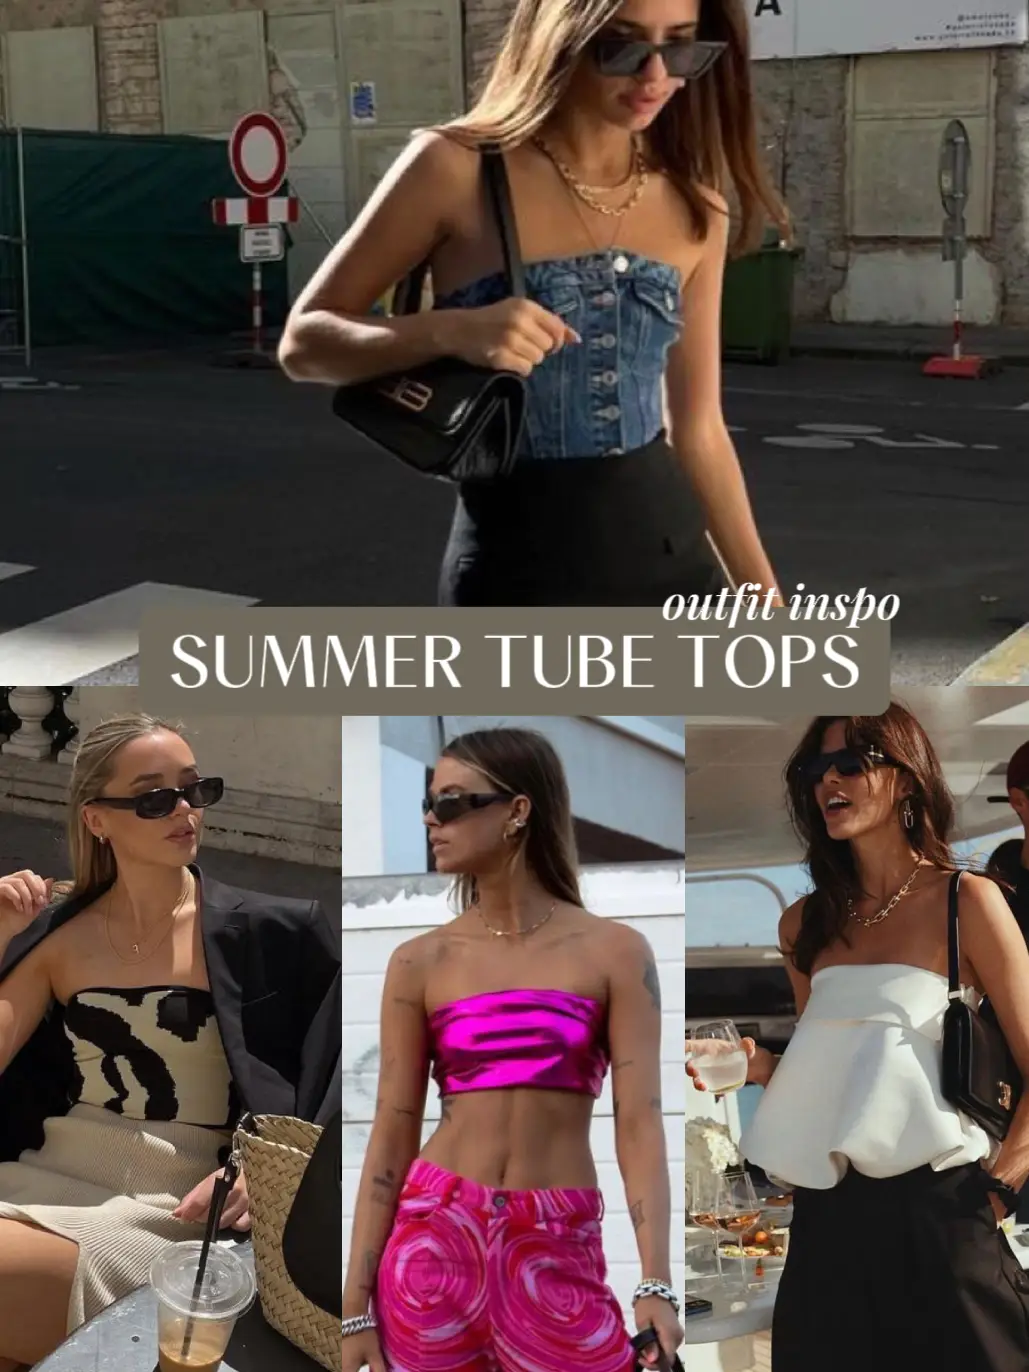 Outfit Inspo, Fun summer tube tops ☀️, Gallery posted by win